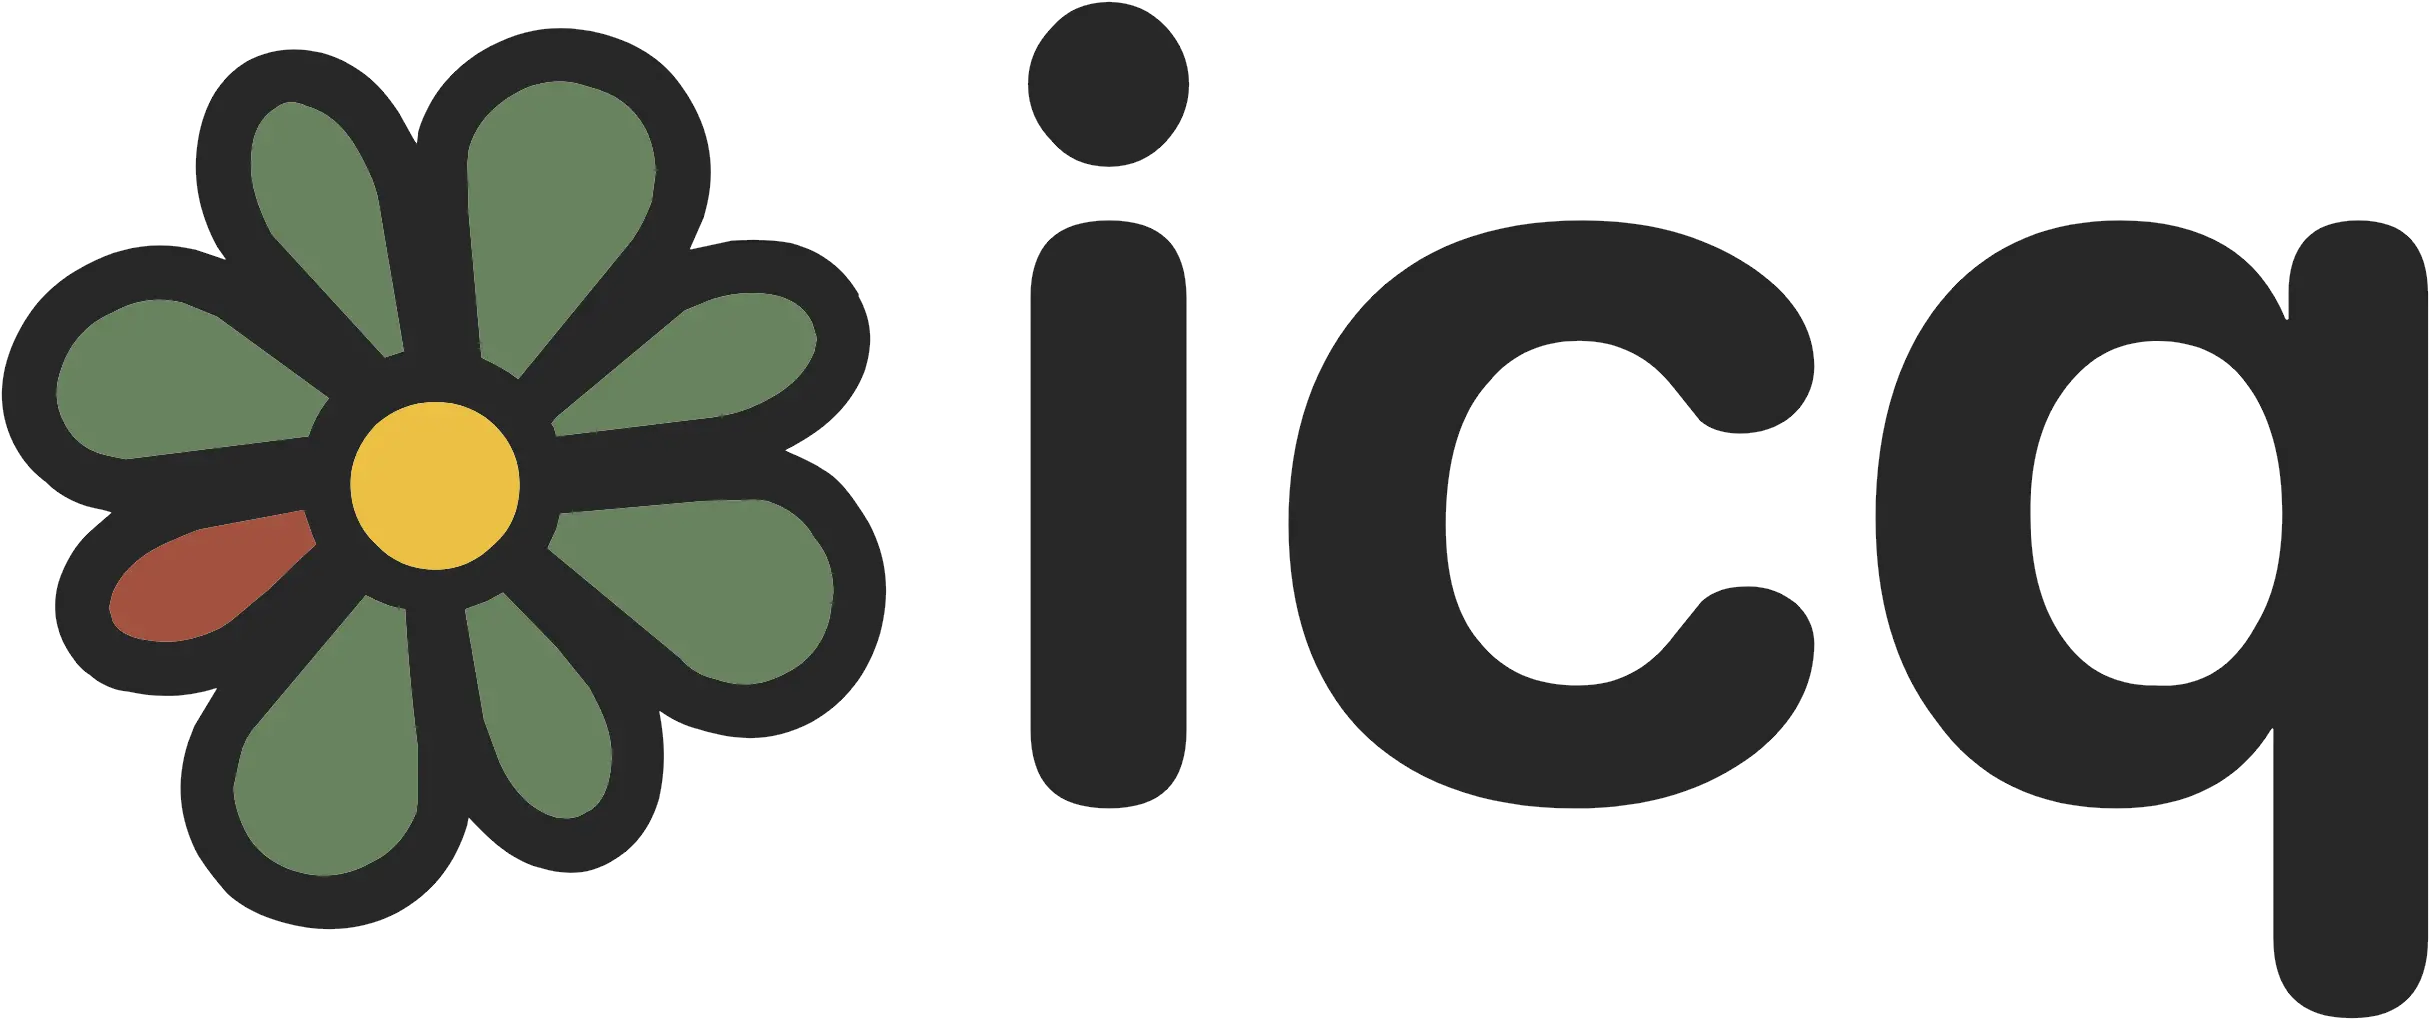 Download Icq Logo Image With Icq Png Aol Logo Png